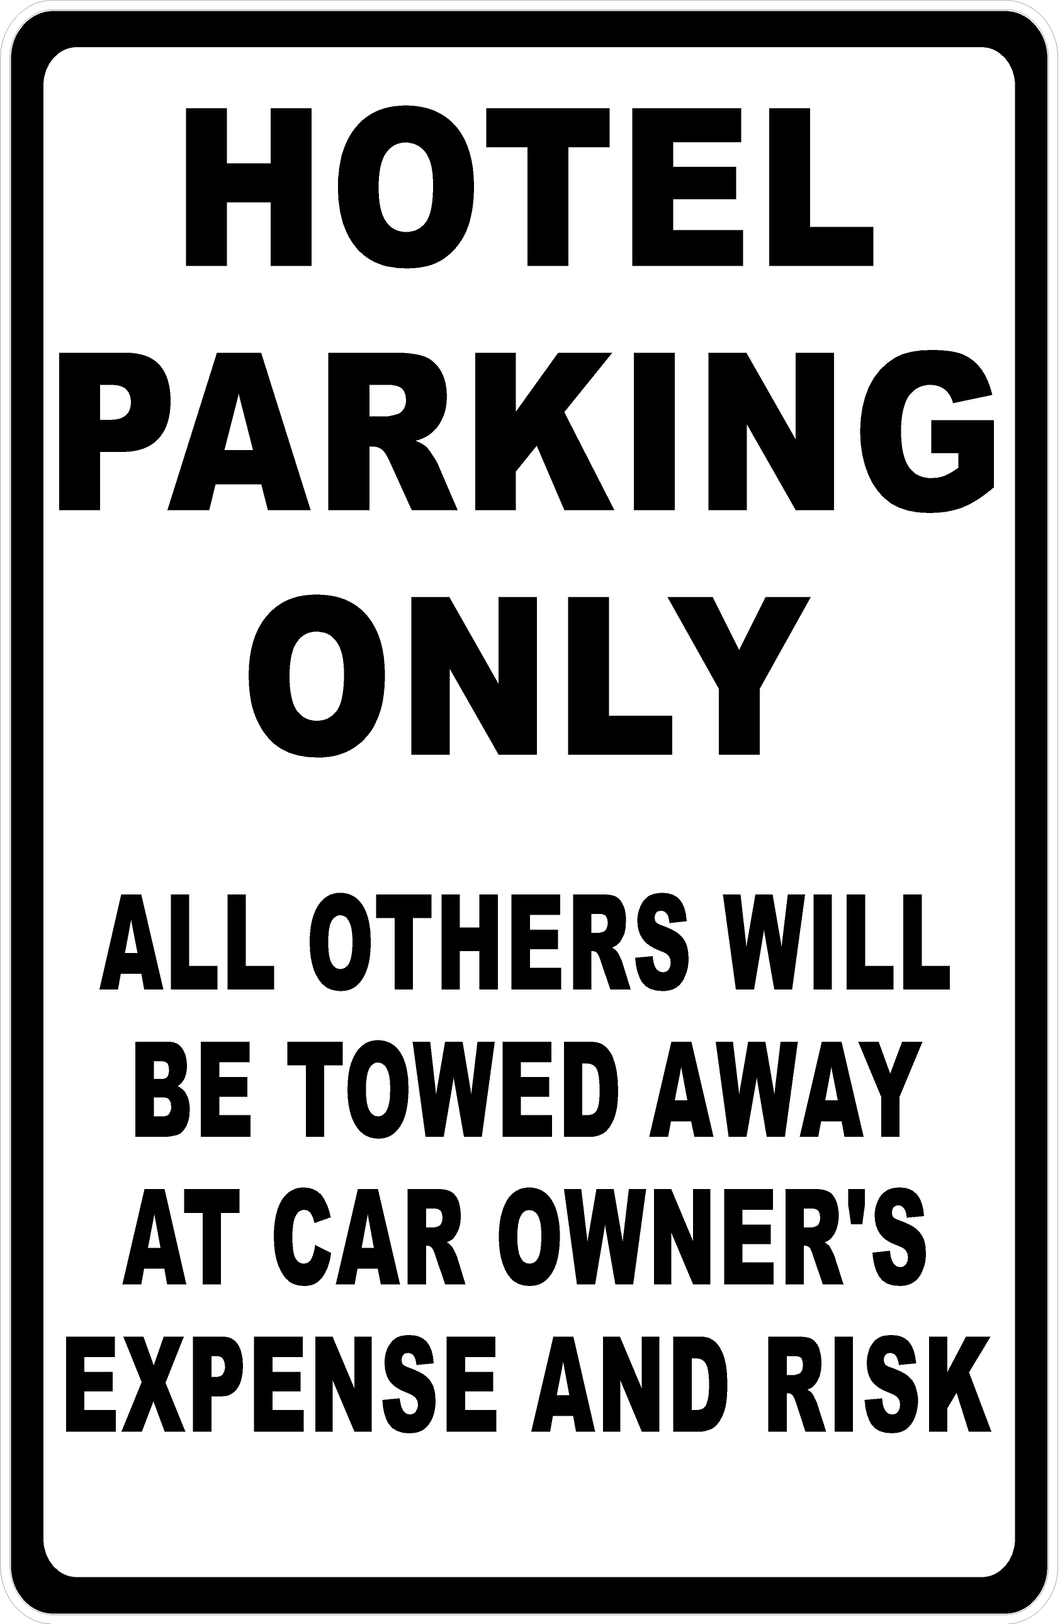 Hotel Parking Only All Others Will Be Towed Sign